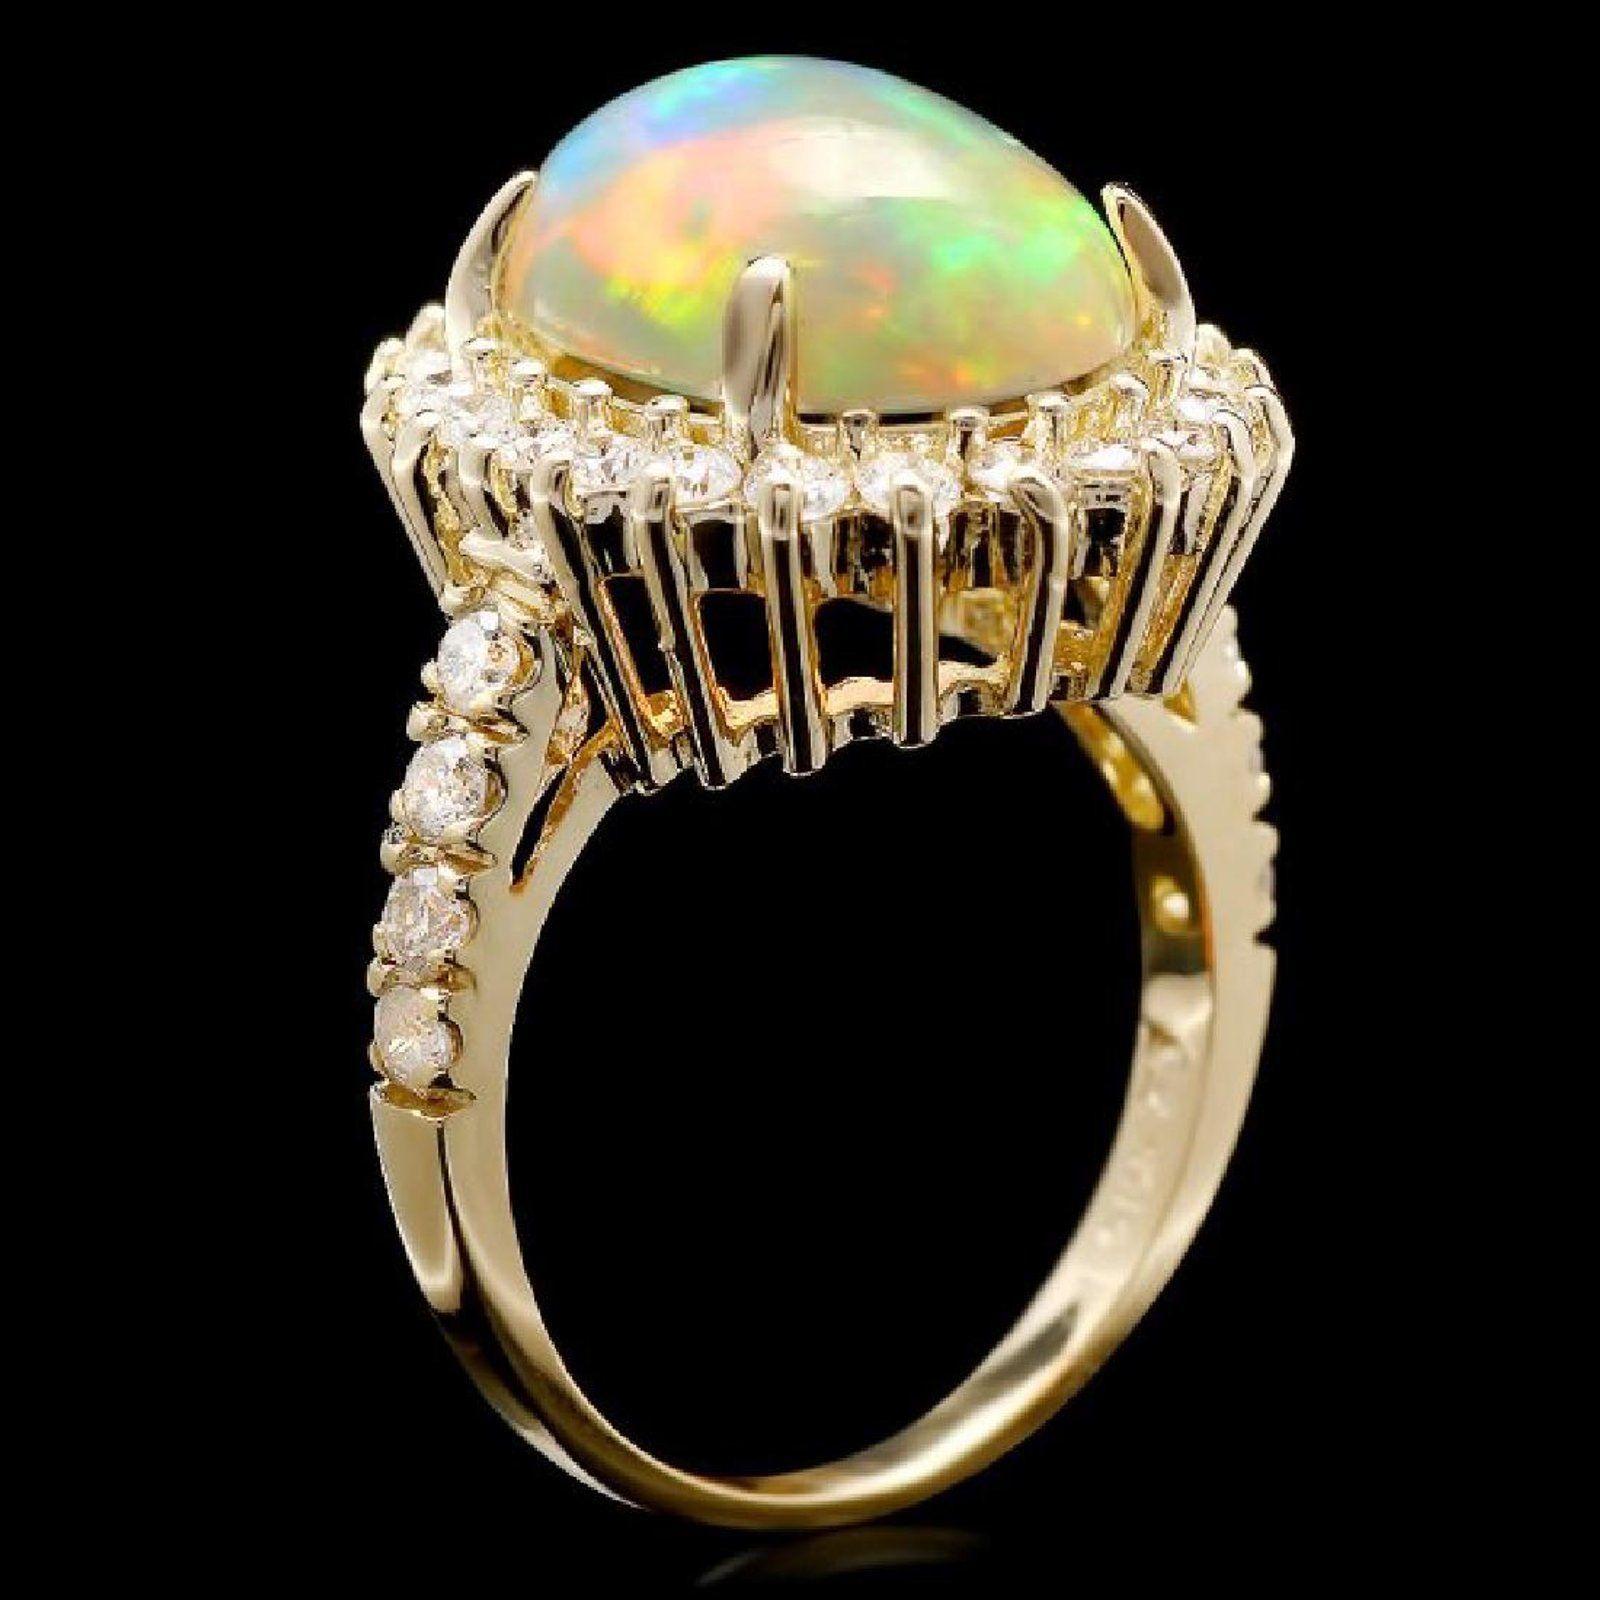 6.05 Carats Natural Impressive Ethiopian Opal and Diamond 14K Solid Yellow Gold Ring

The opal has beautiful fire, pictures don't show the whole beauty of the opal!

Total Natural Opal Weight is: Approx. 5.00 Carats

Opal Measures: 14.00x